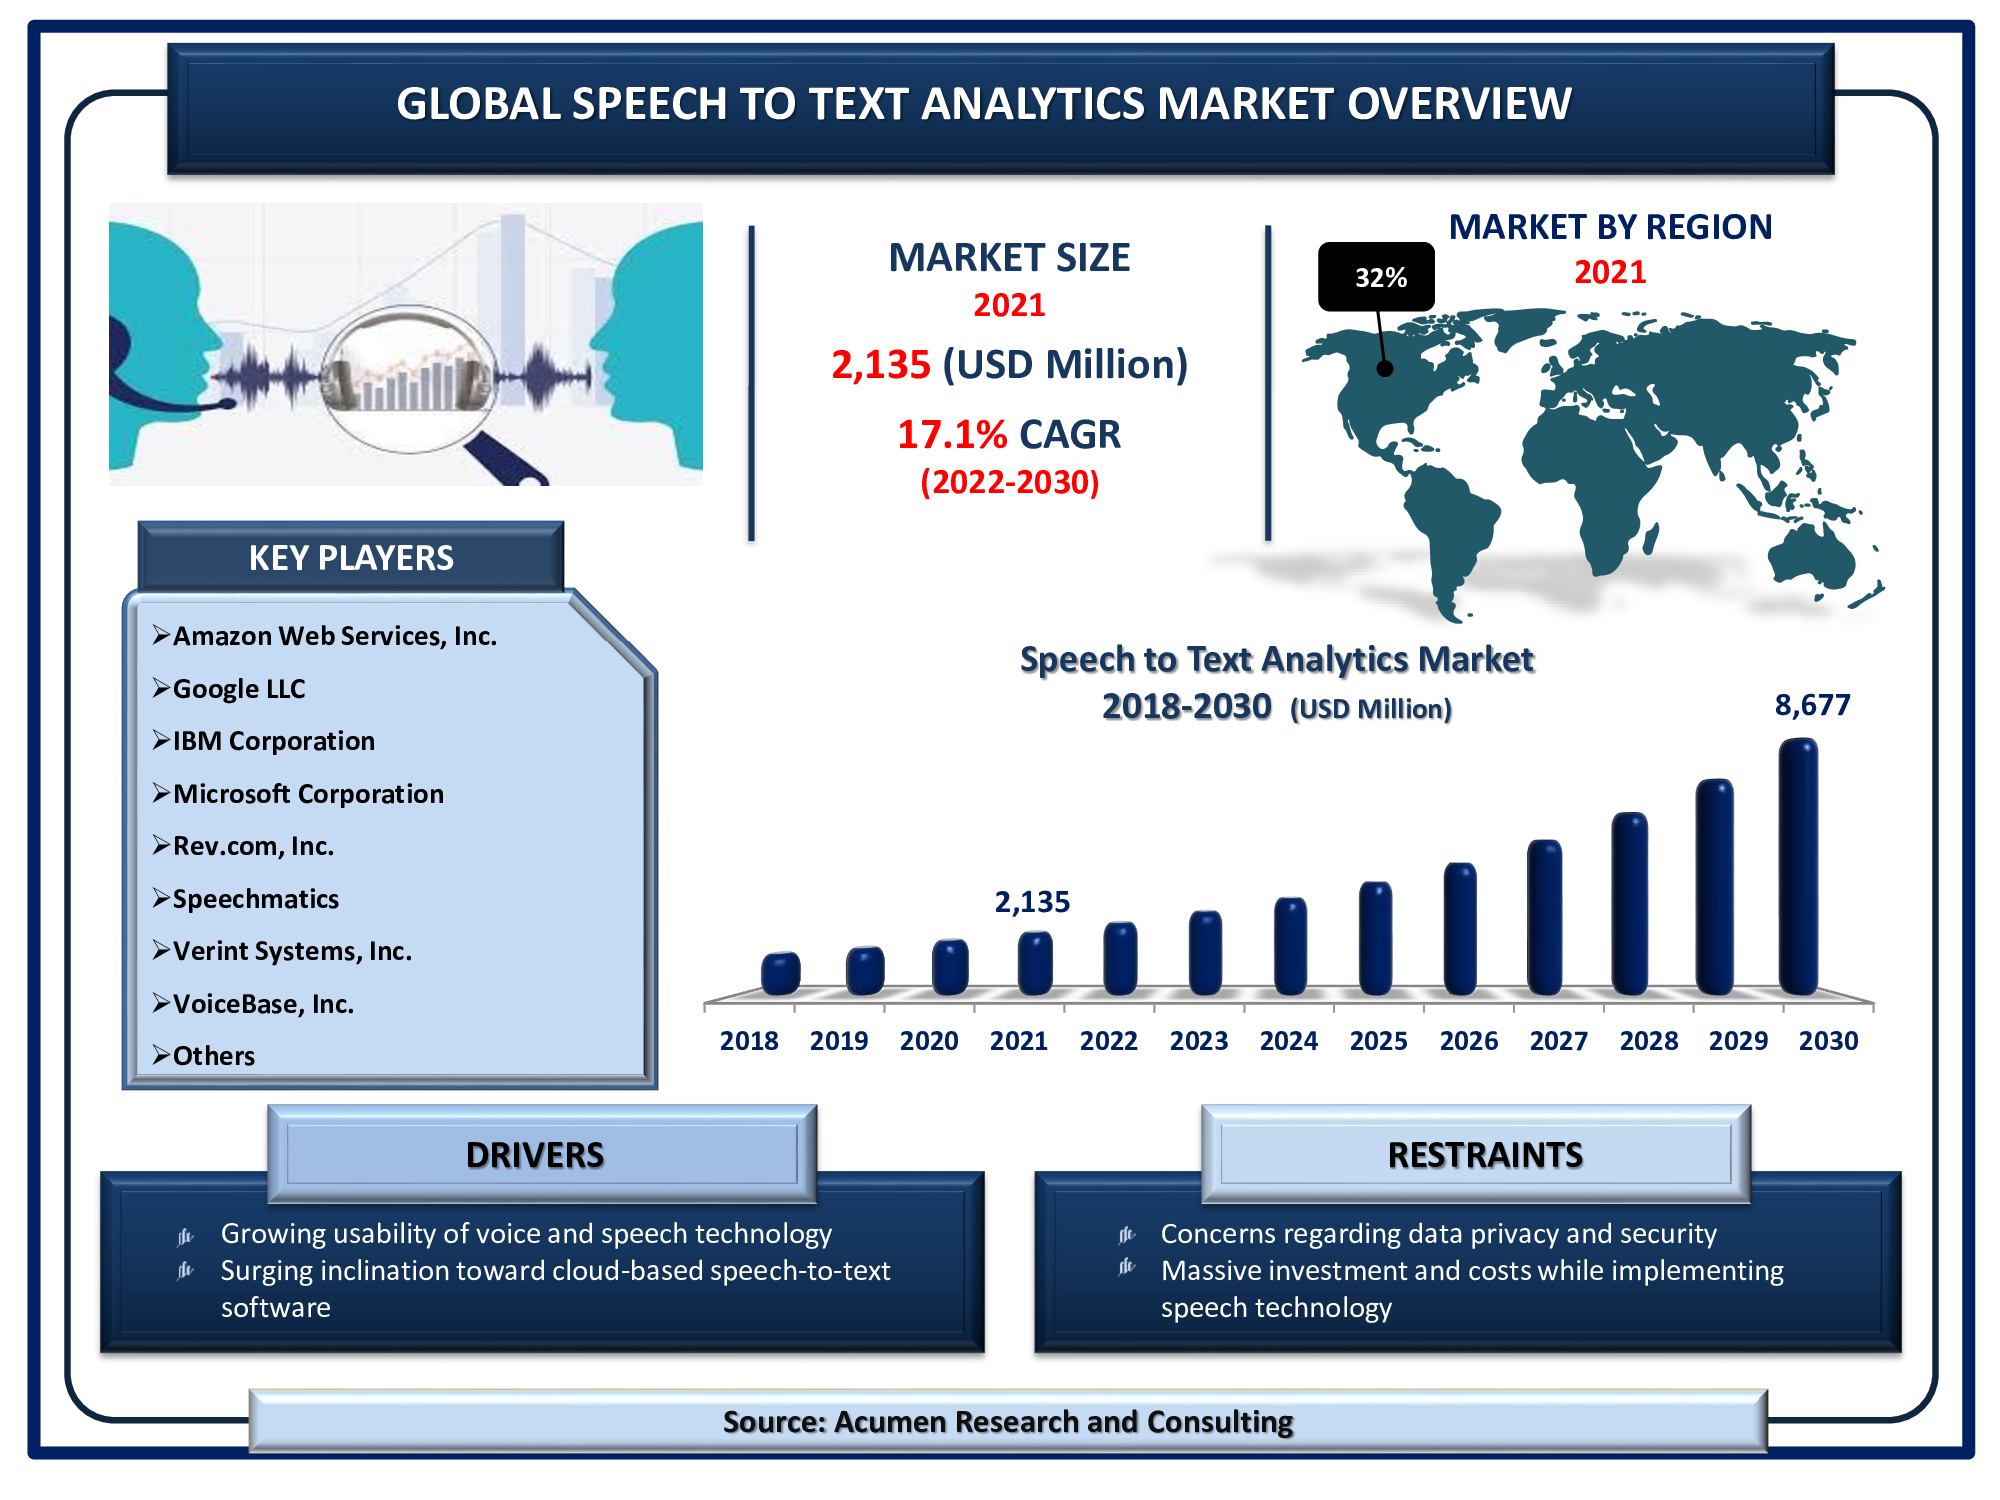 Speech to Text Analytics Market will achieve a market size of USD 8,677 Million by 2030, budding at a CAGR of 17.1%